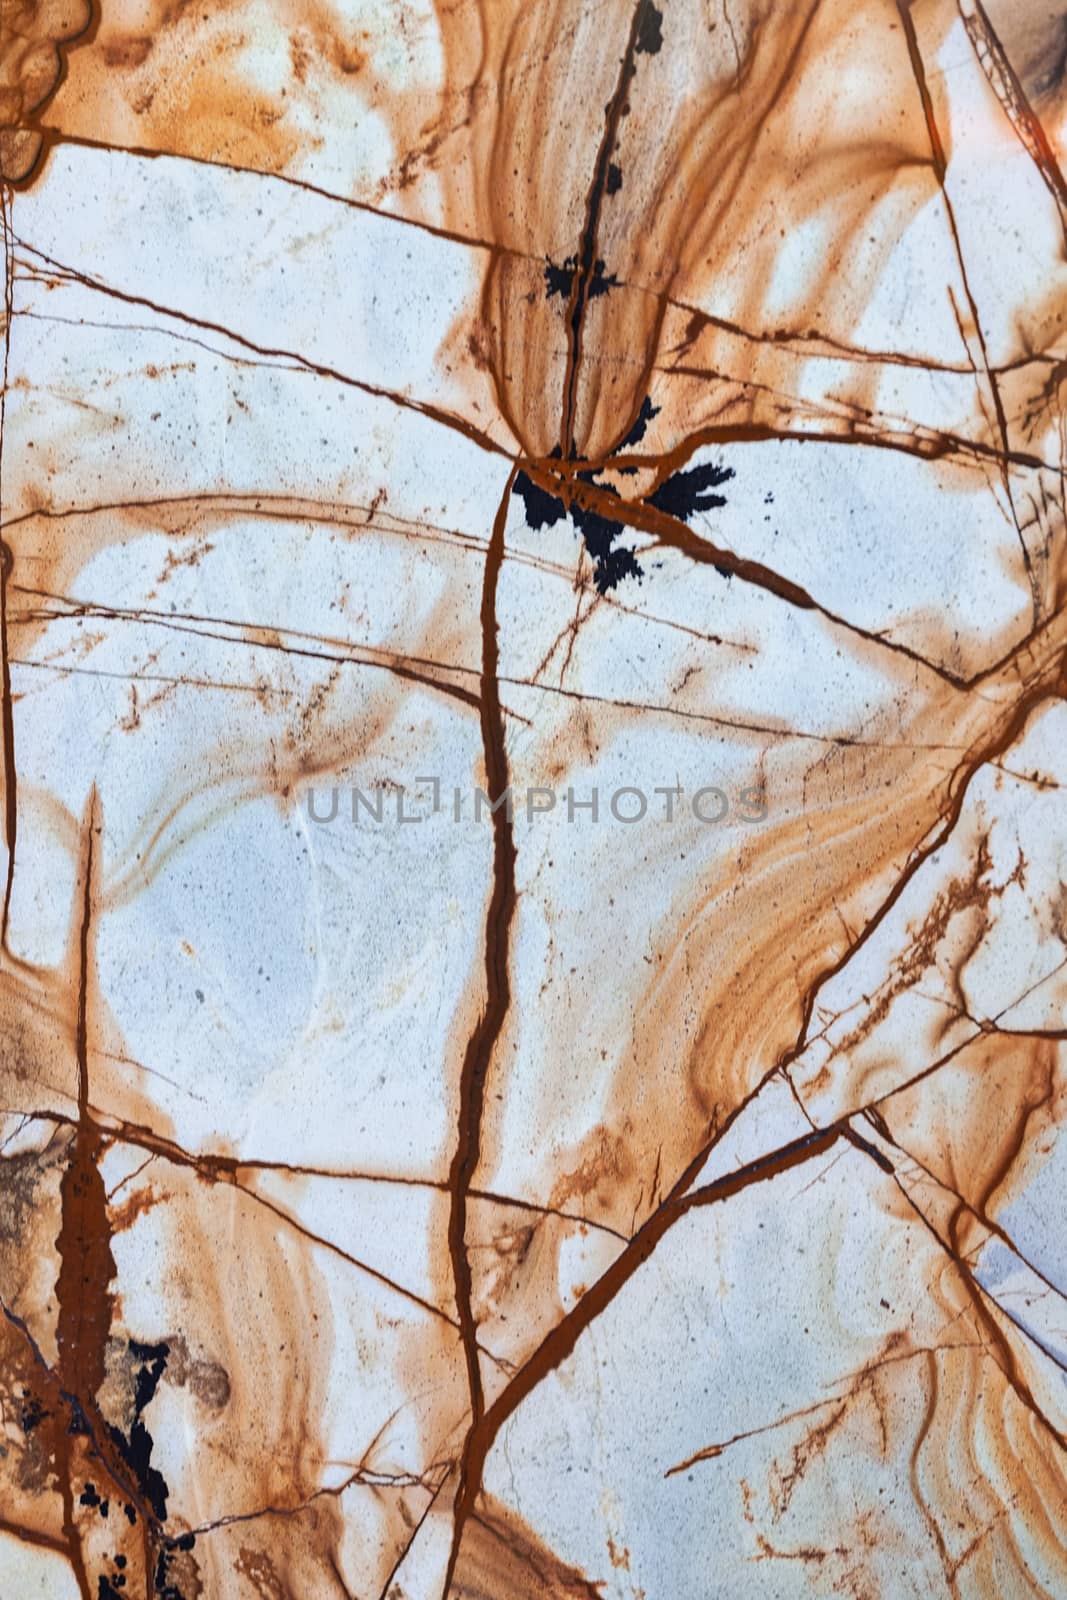 colorful marble floor like a background, note shallow depth of field